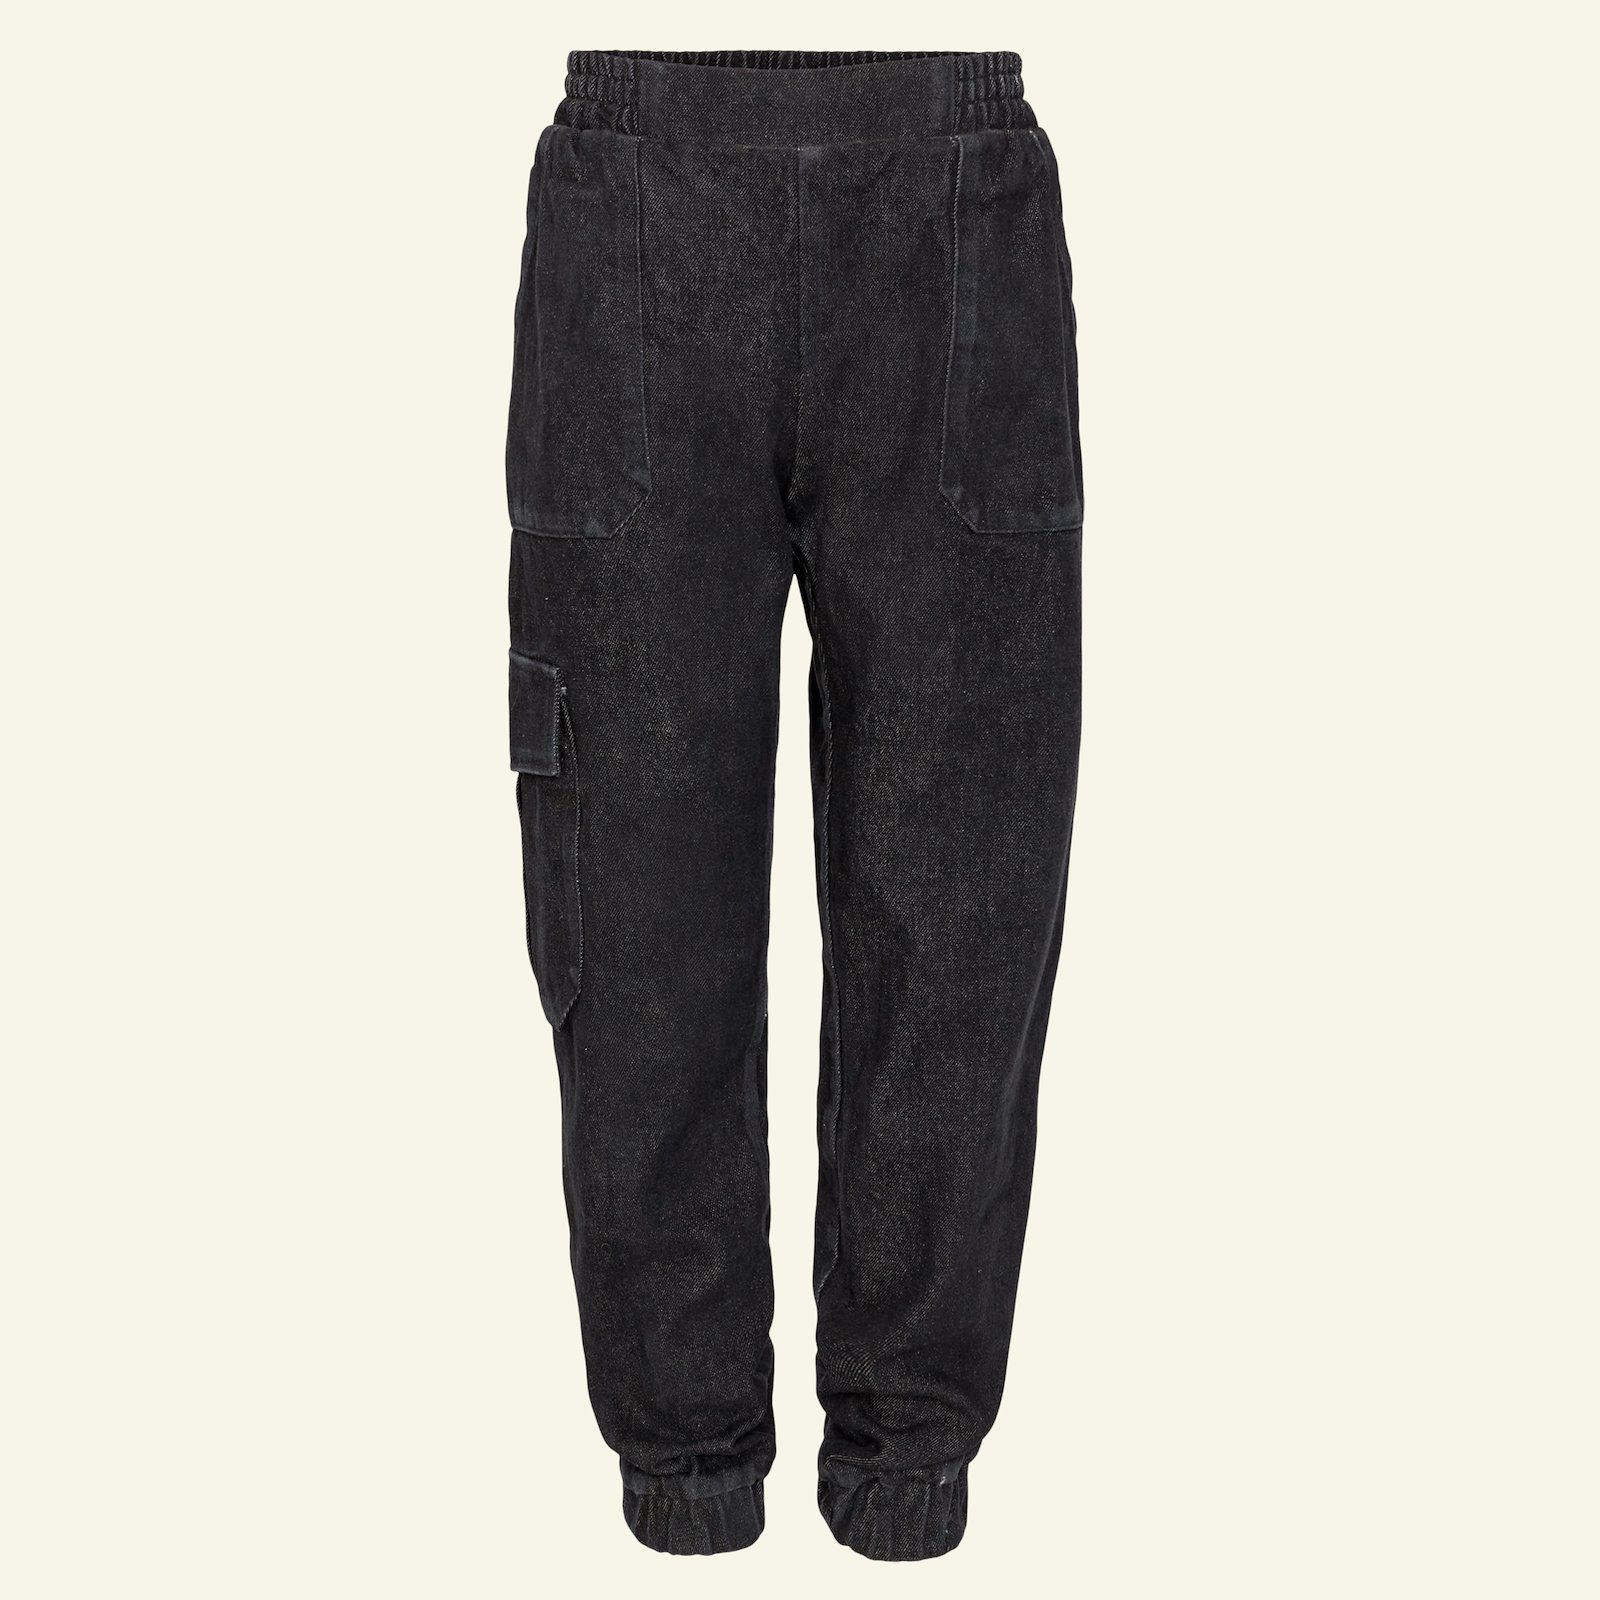 Cargo trousers, 104/4y p60037_5343_sskit